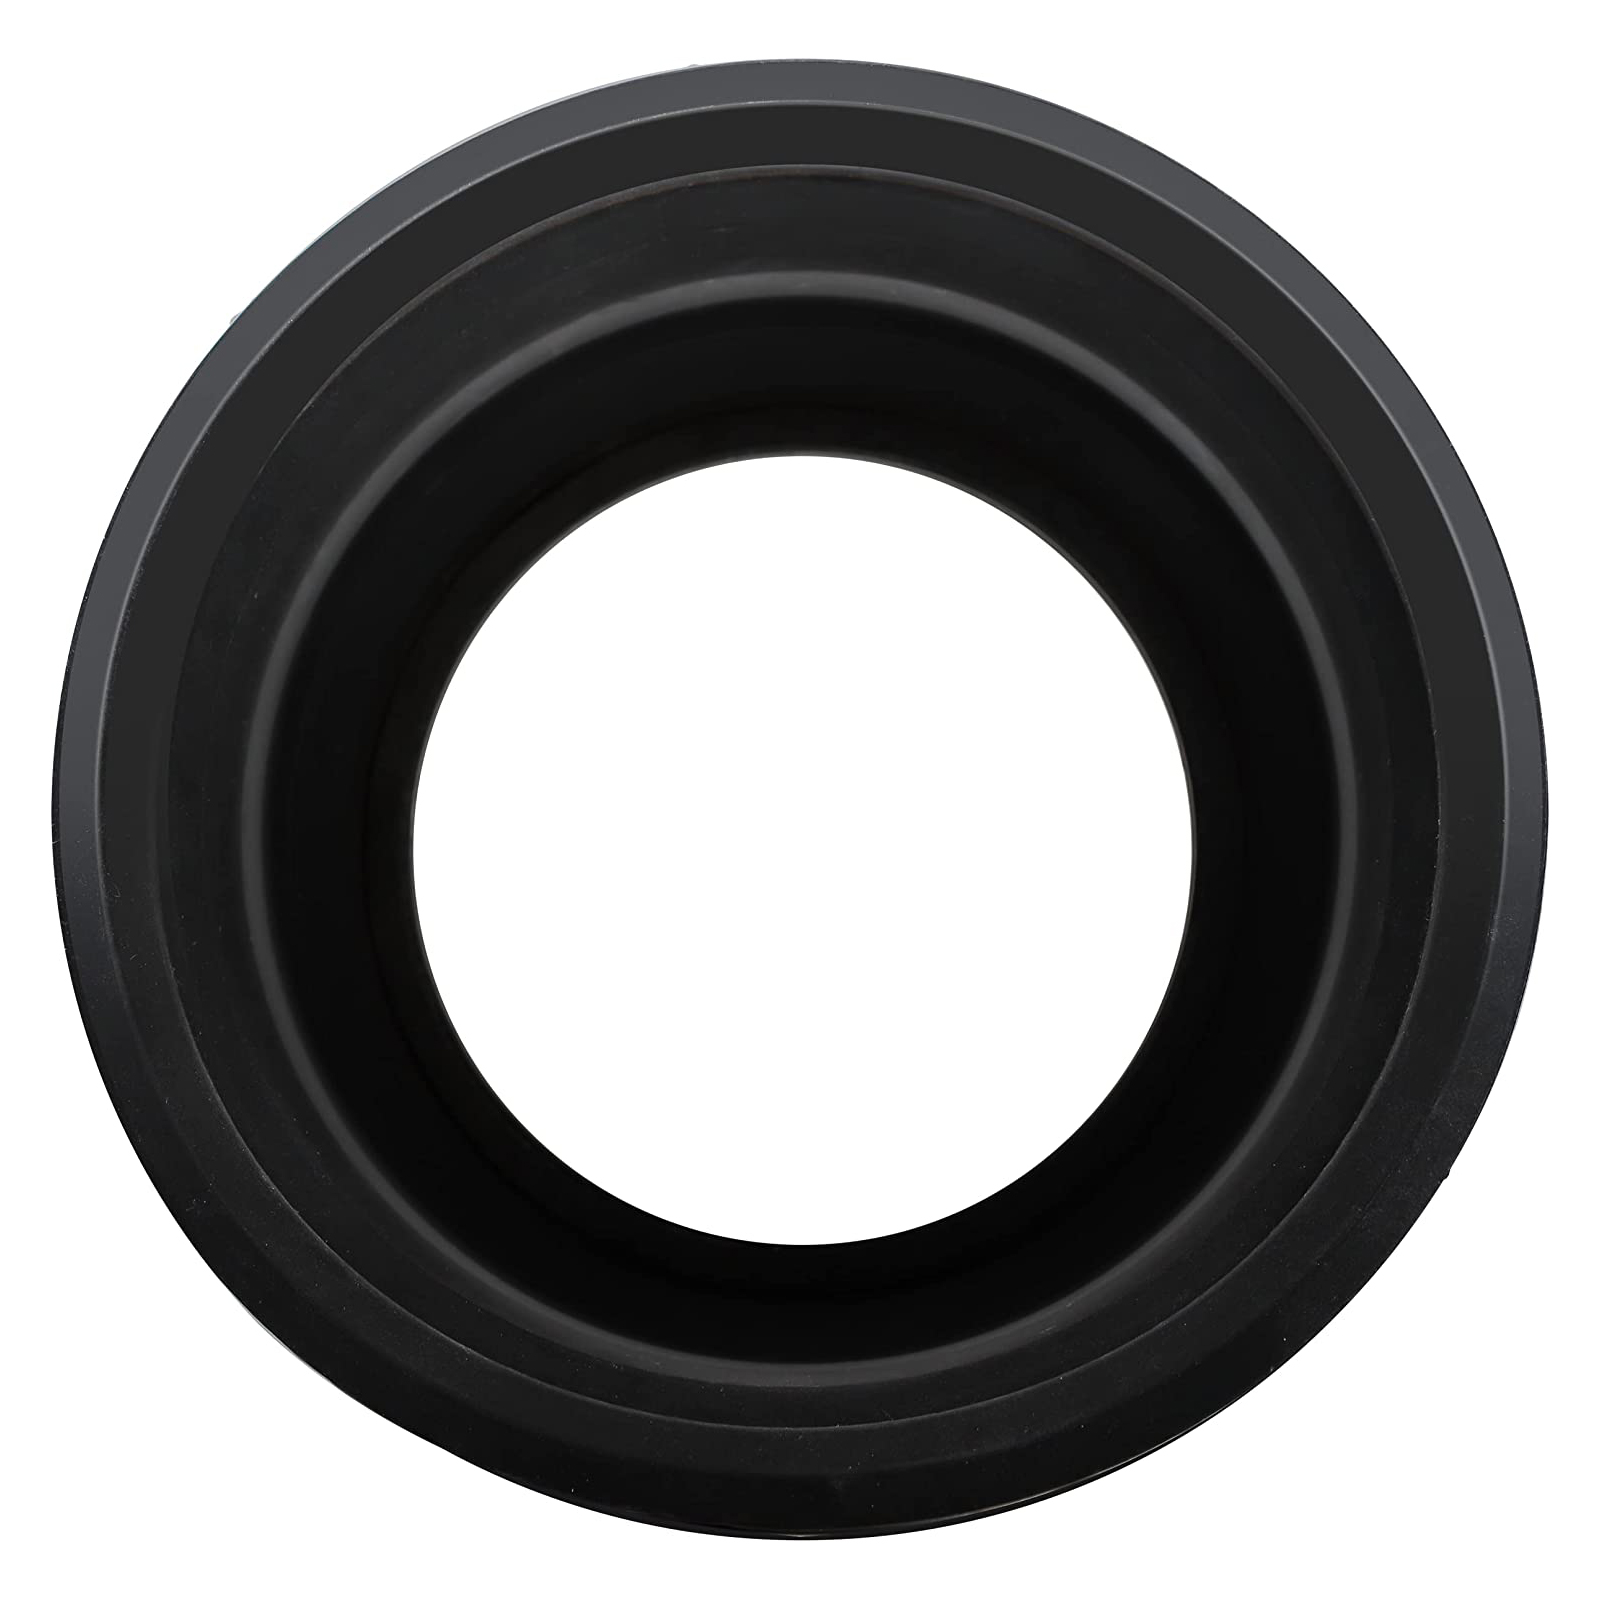 Kase Wolverine 52mm to 82mm Magnetic Step Up Filter Ring Adapter 52 82